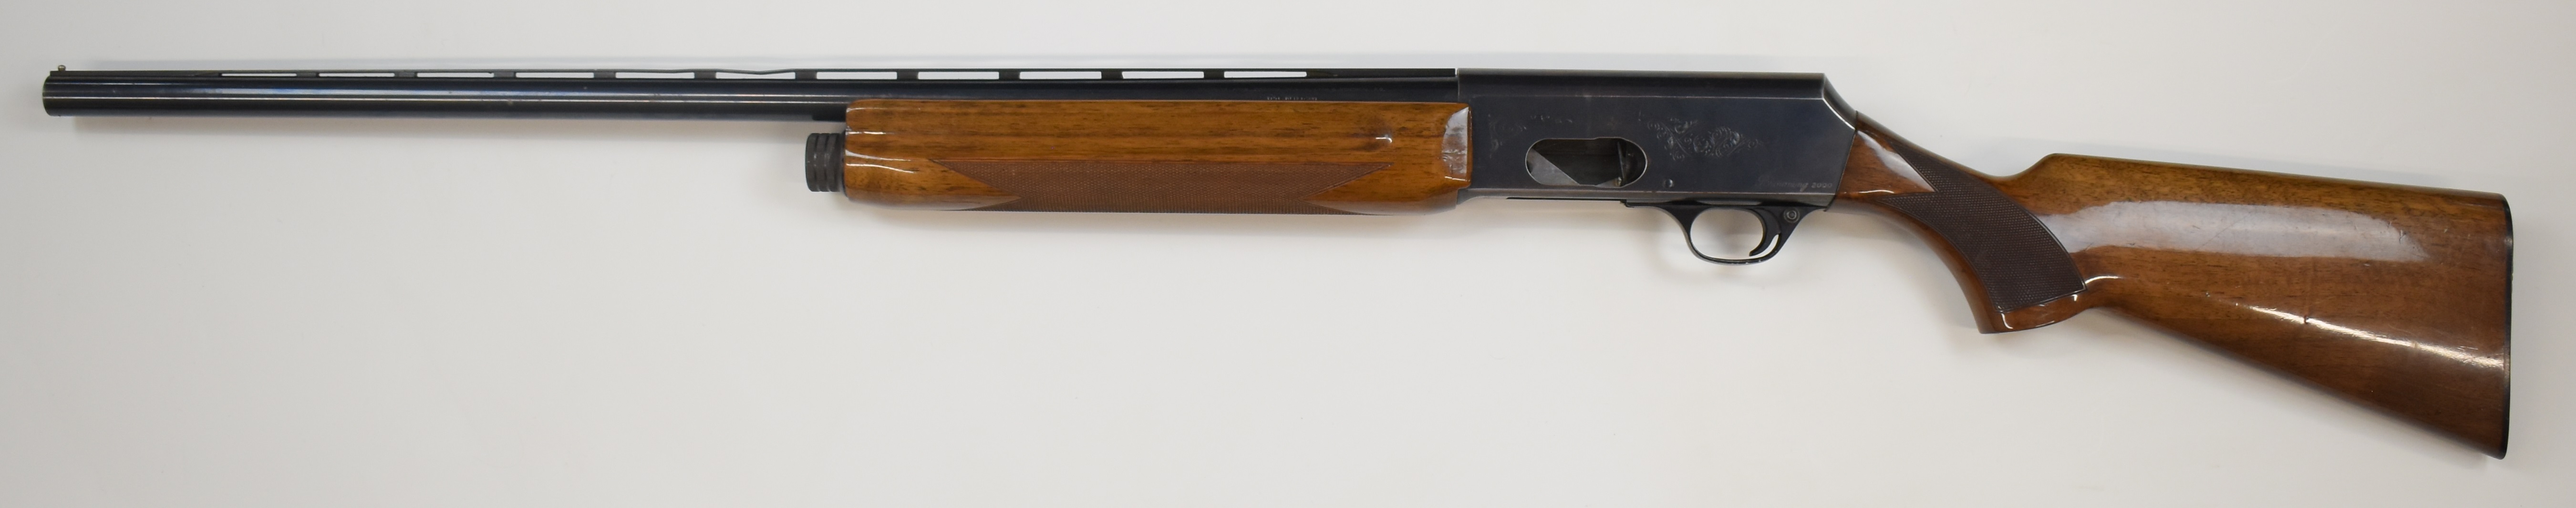 Browning 2000 12 bore 3-shot semi-automatic shotgun with named and engraved lock, chequered semi- - Image 8 of 11